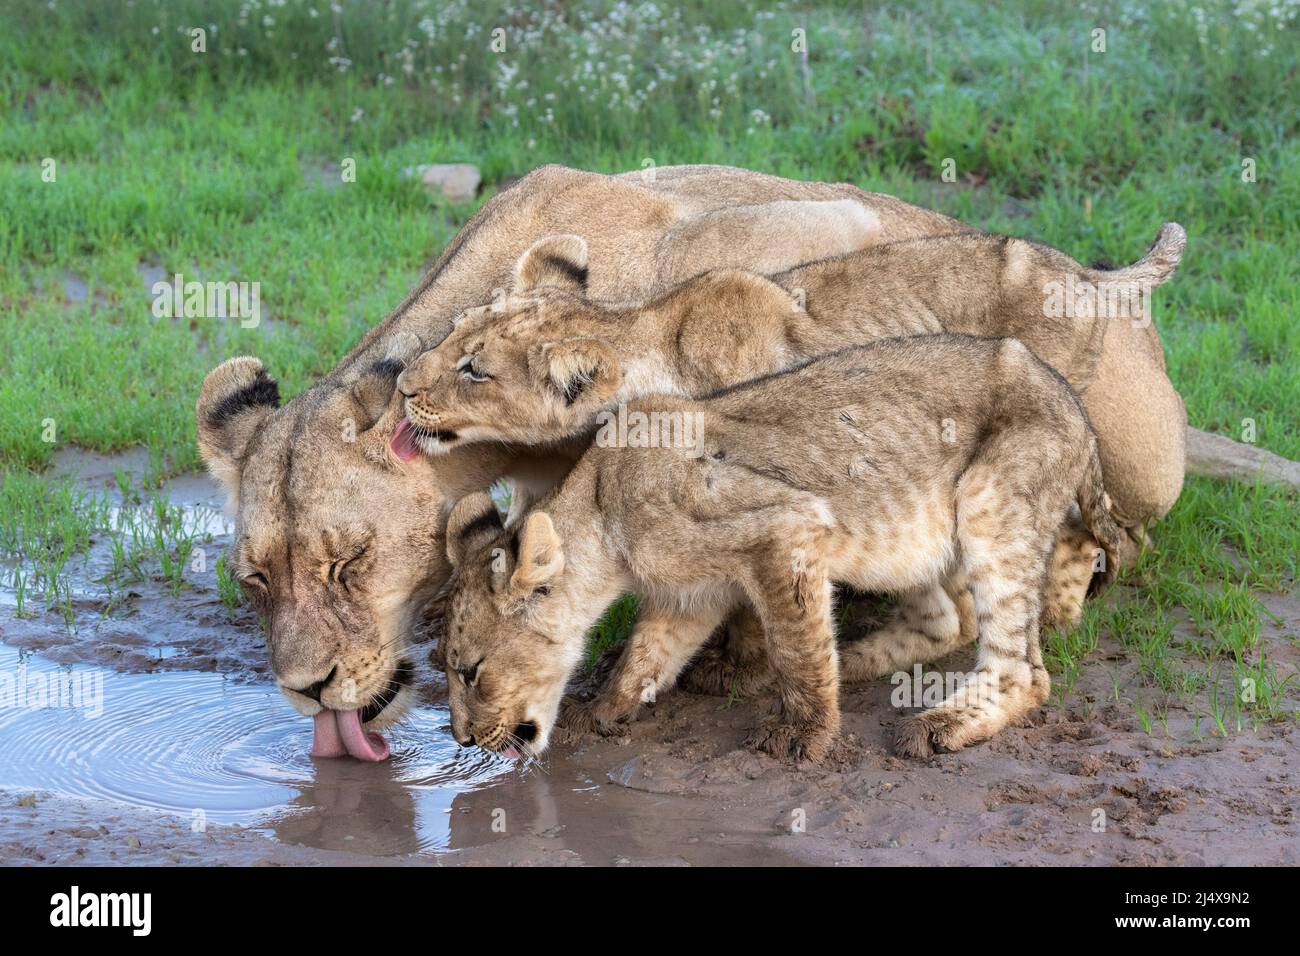 Lioness (Panthera leo) with cubs at water, Kgalagadi transfrontier park, Northern Cape, South Africa Stock Photo